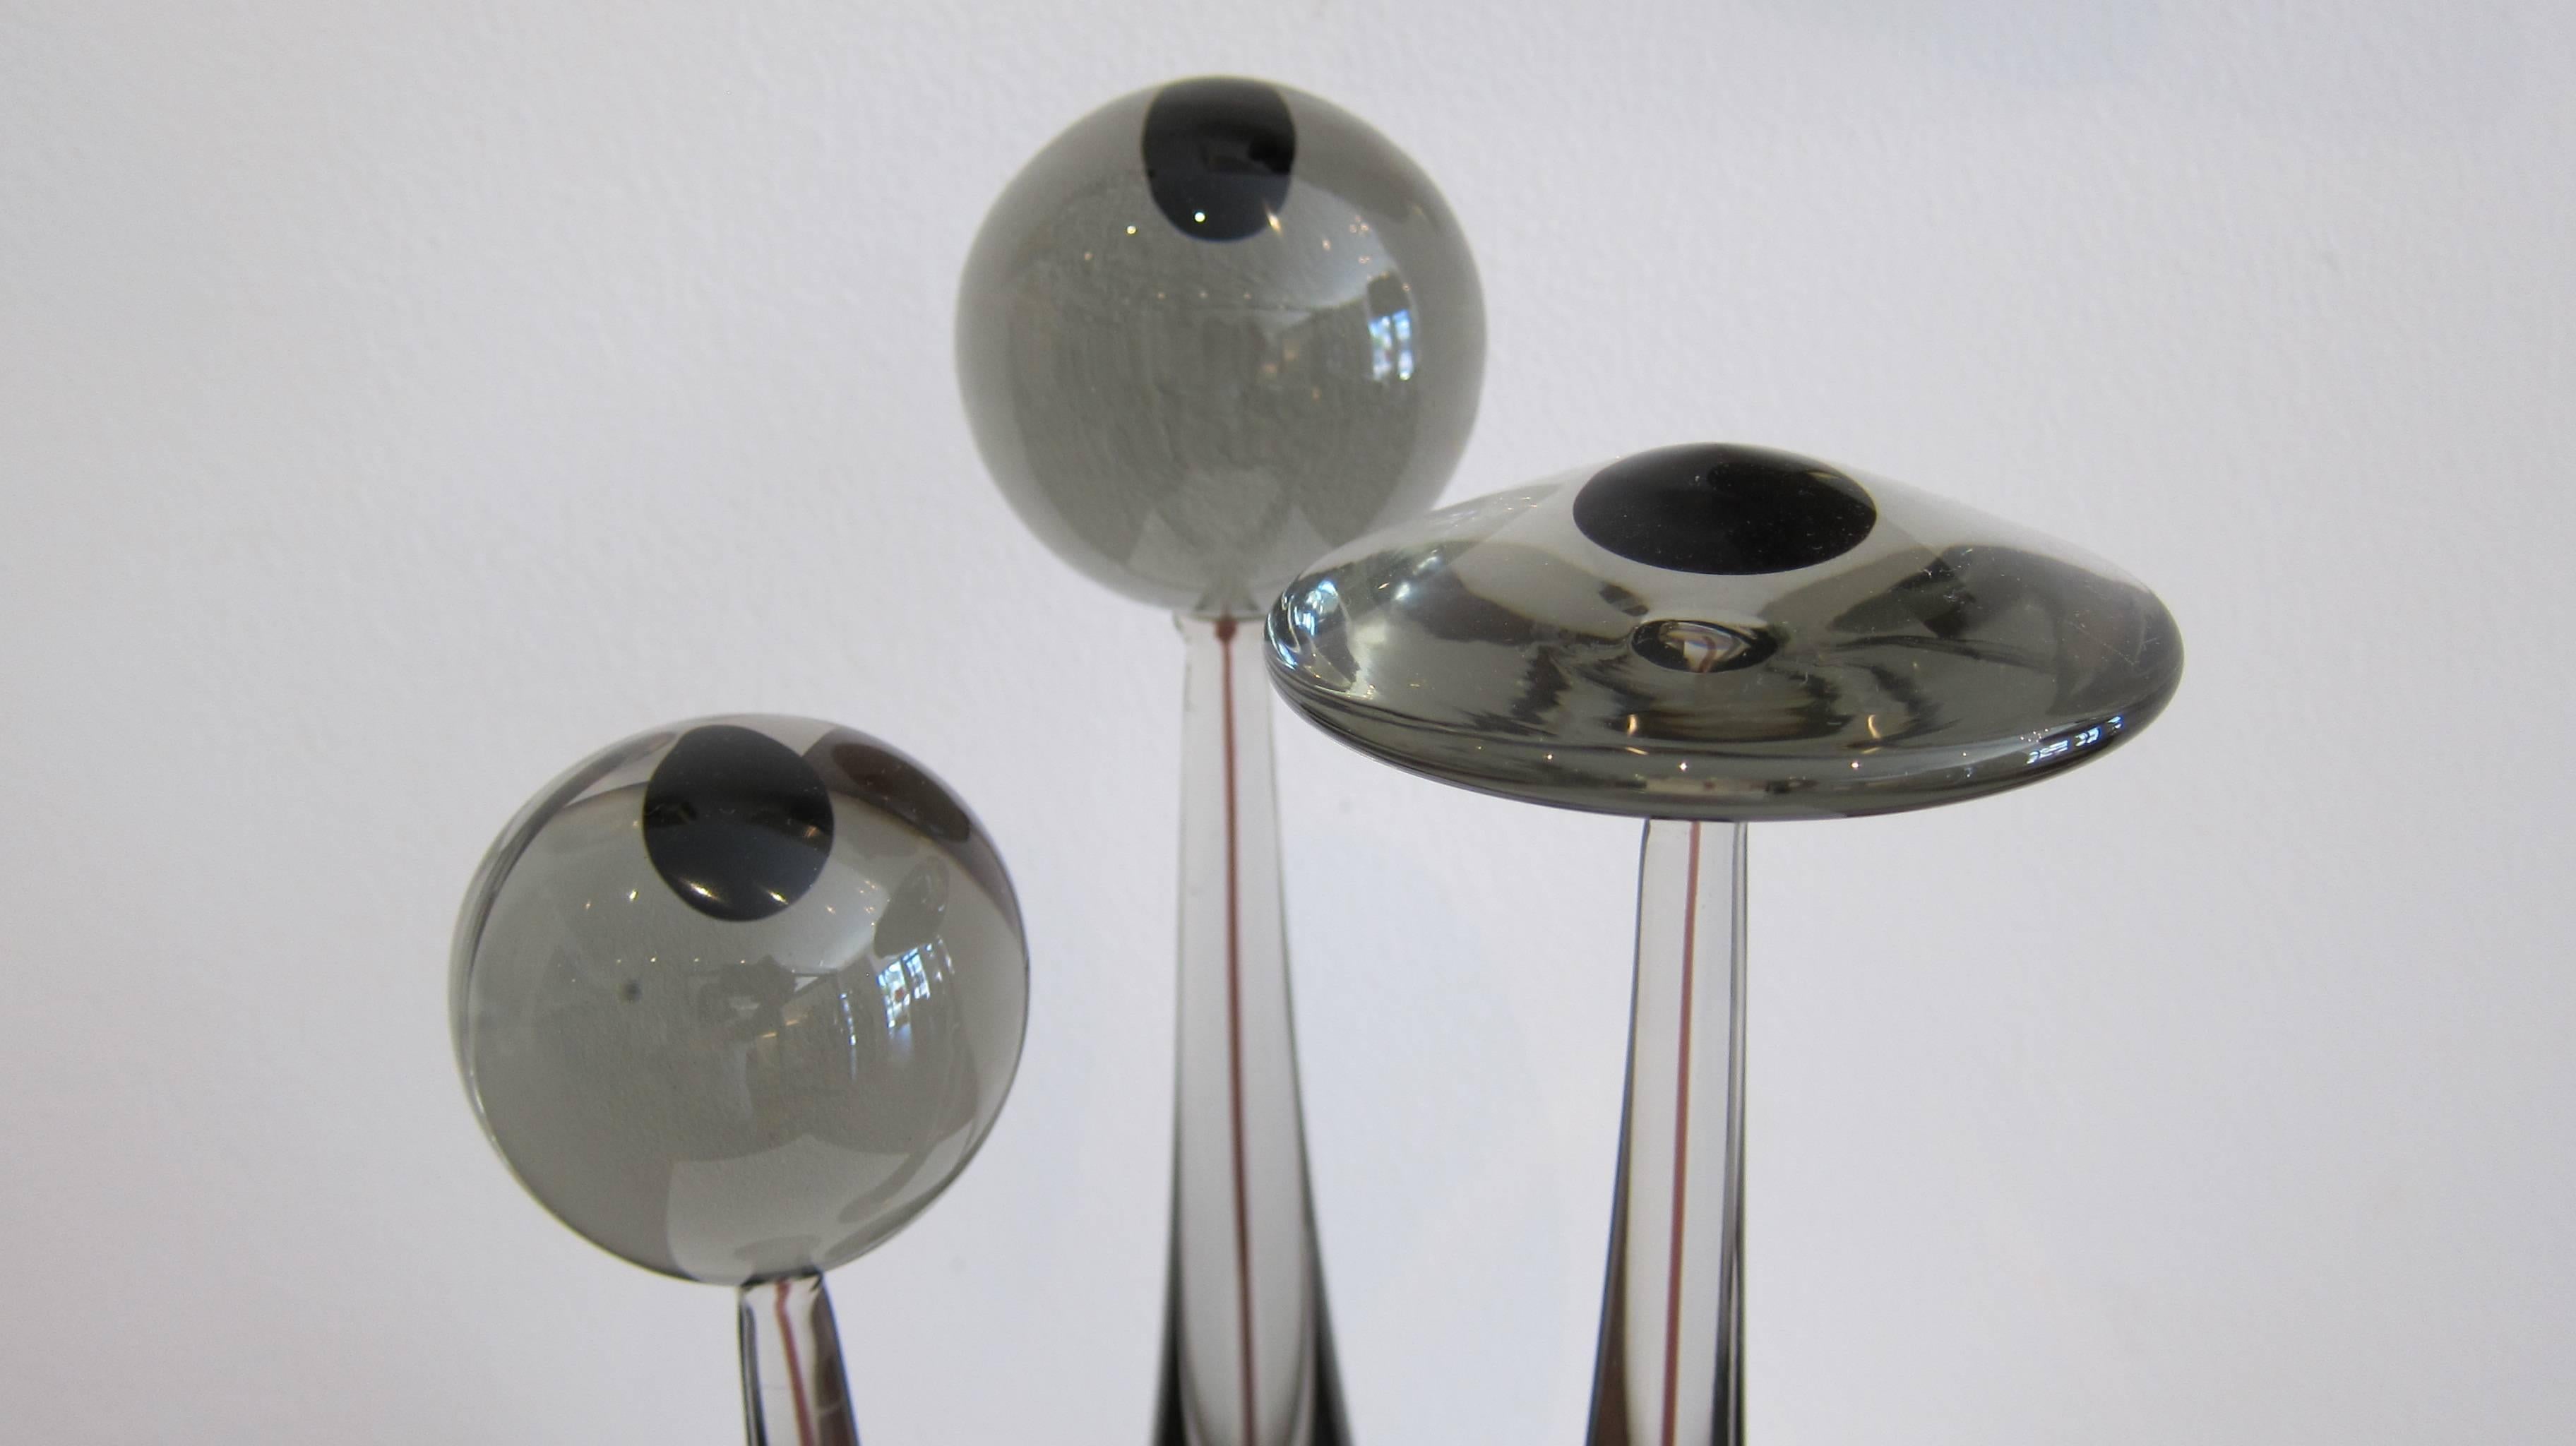 Three Sommerso glass sculptures by Luciano Gaspari. Italy circa 1958
Sizes are 12